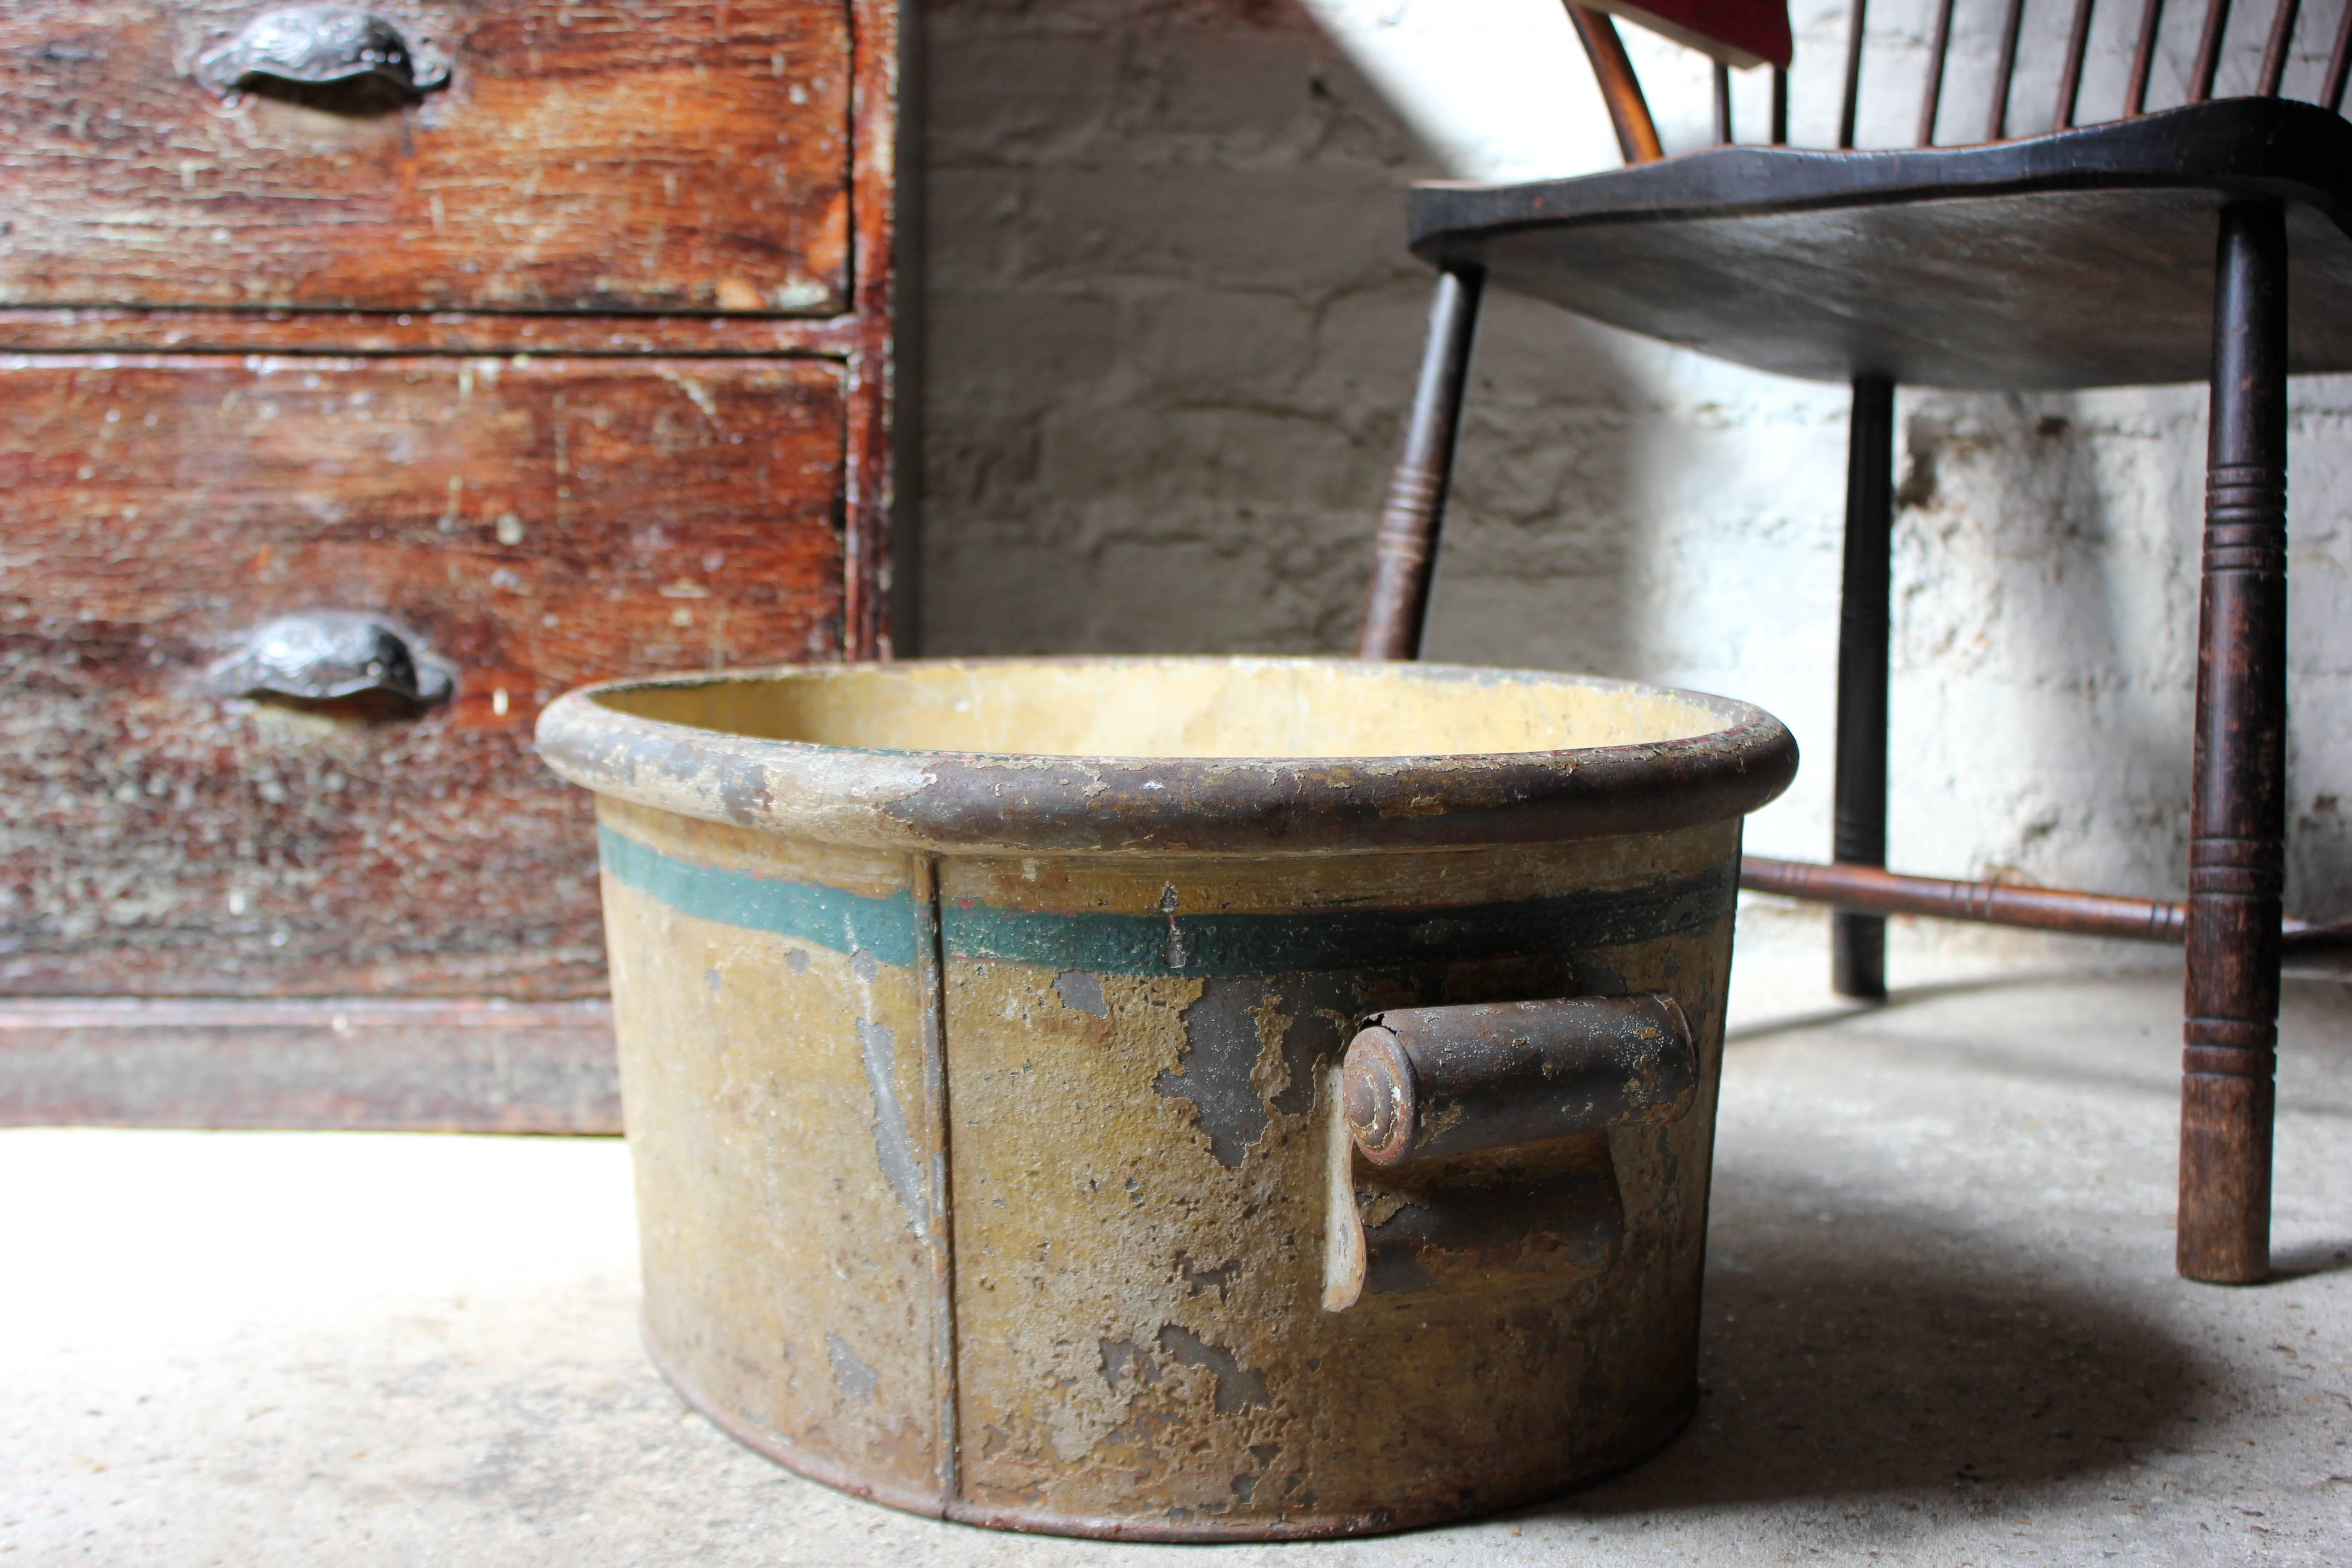 Of ovoid form, the attractive Regency period hand-painted toleware footbath having applied scroll handles, the lemon yellow basin with a single turquoise band to the upper section, in very much the Regency taste, with remnants of a red painted band